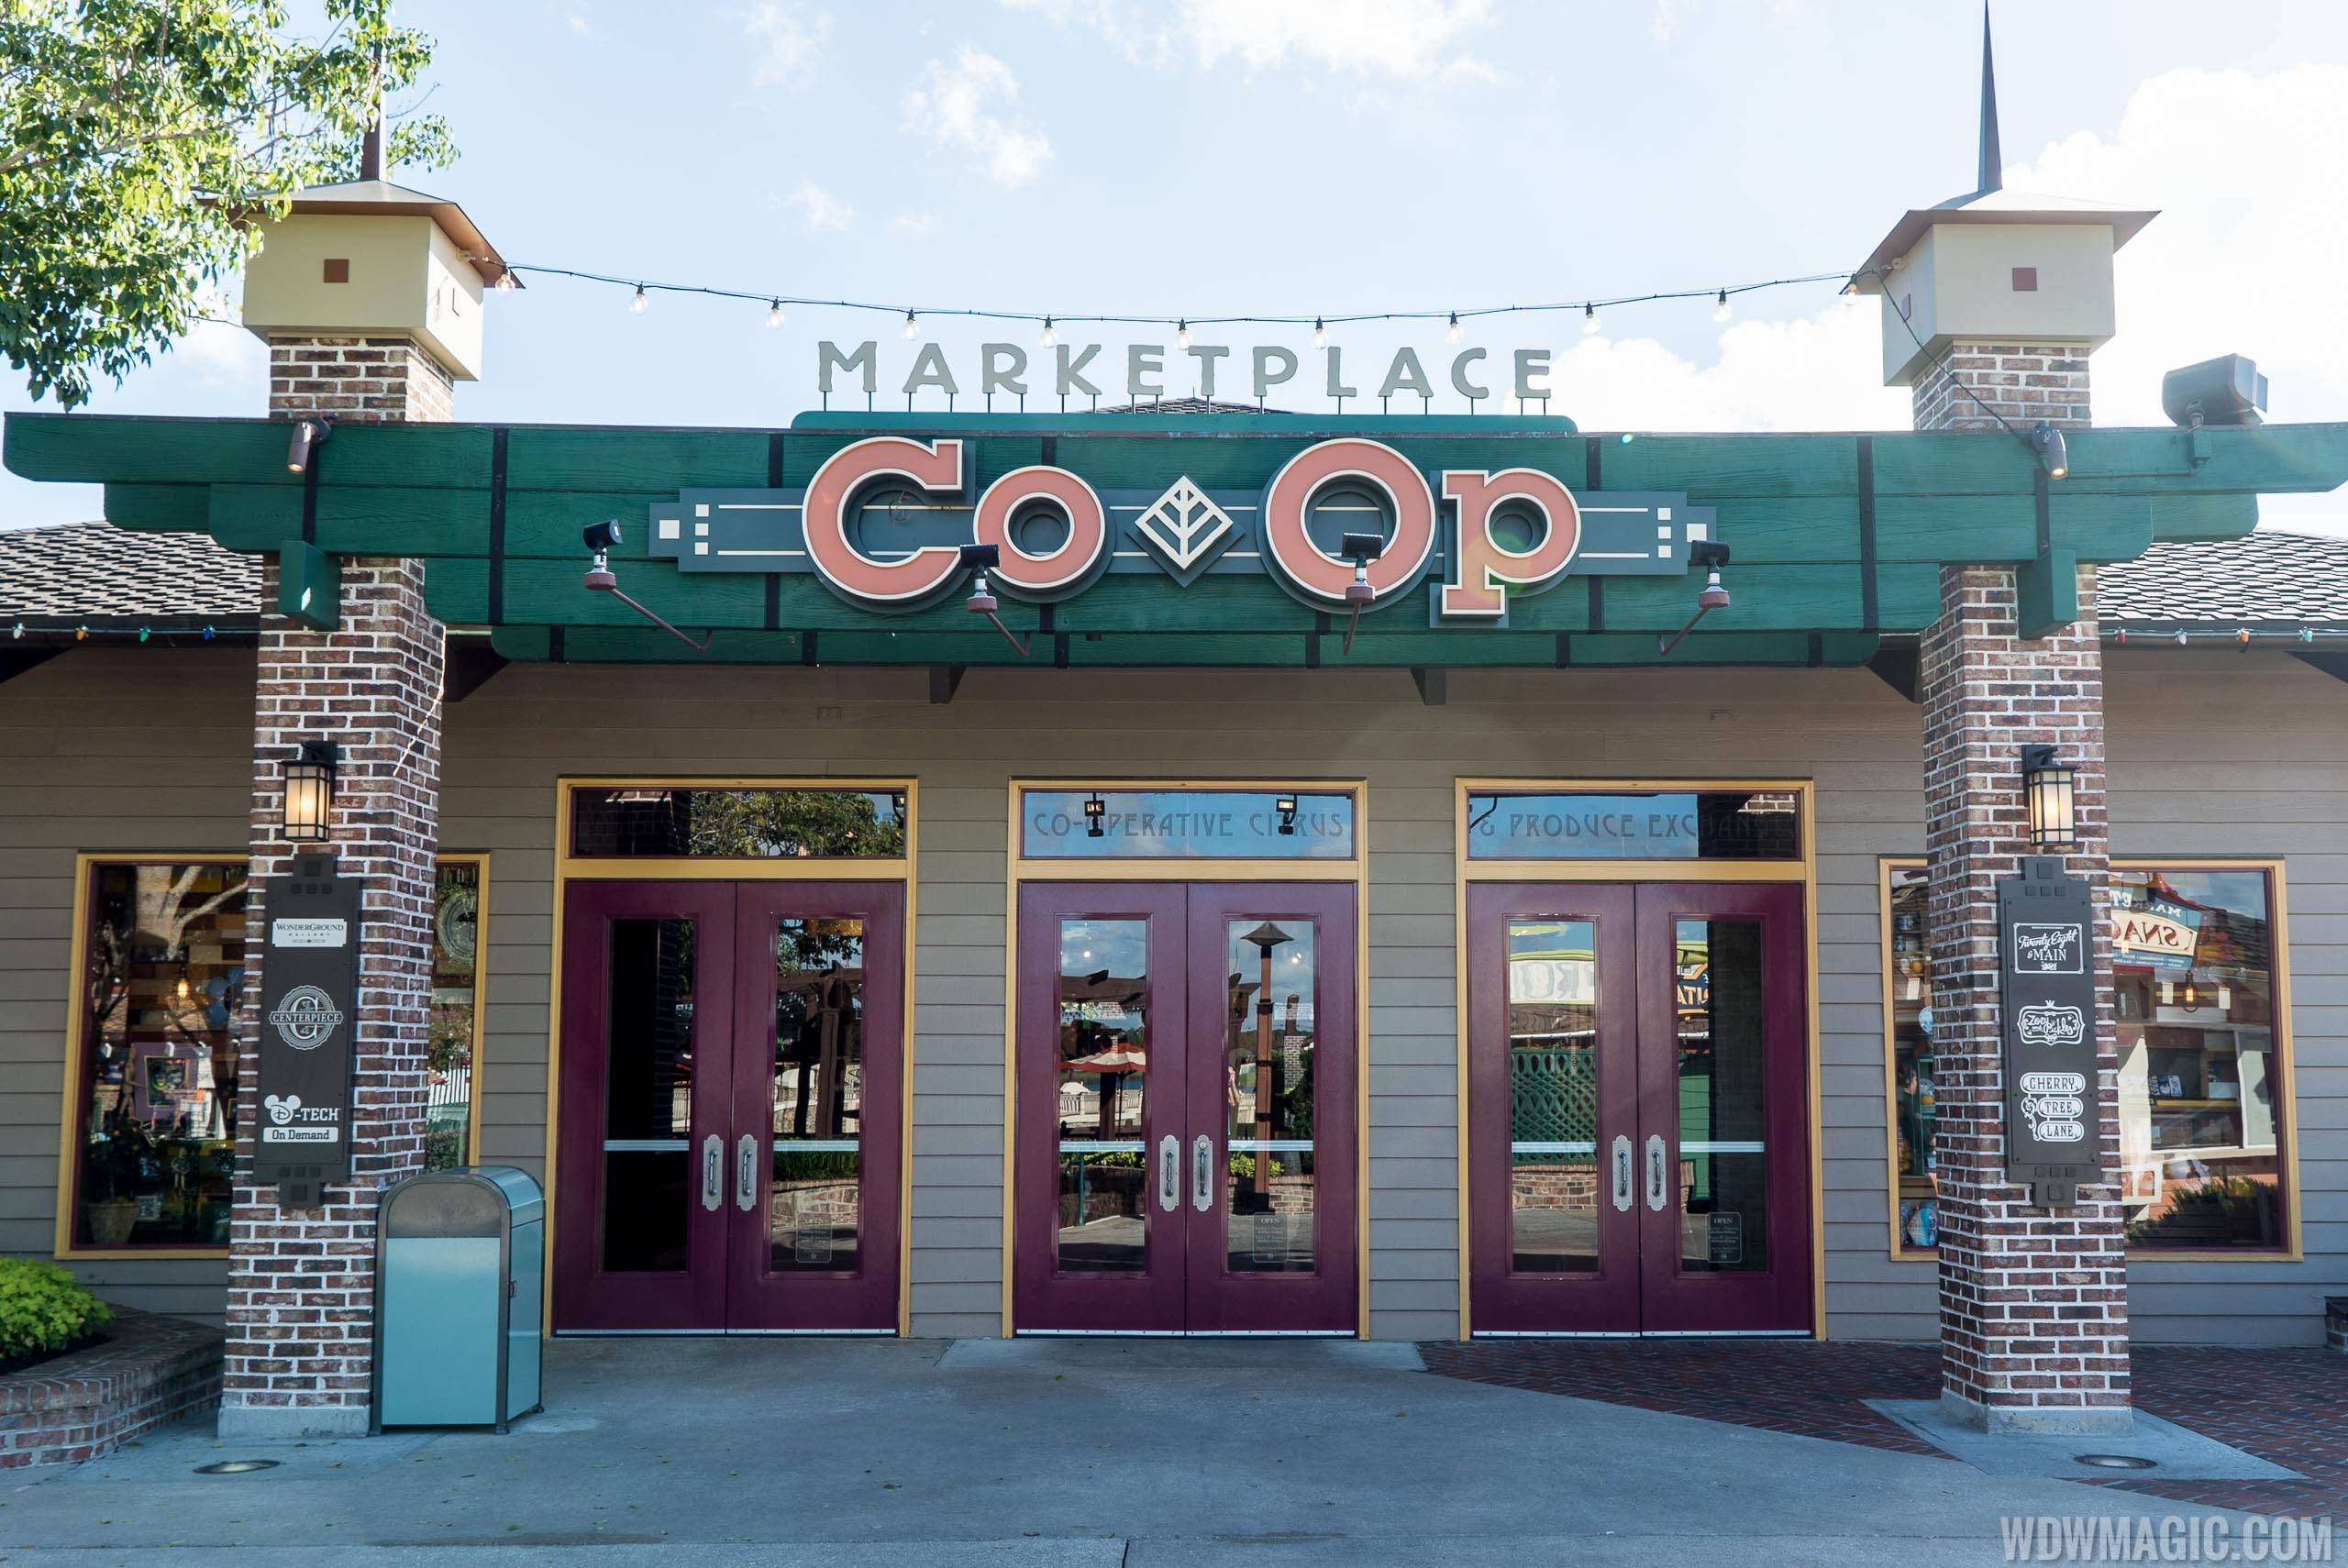 Lovepop Coming To The Marketplace Co Op At Disney Springs This Fall